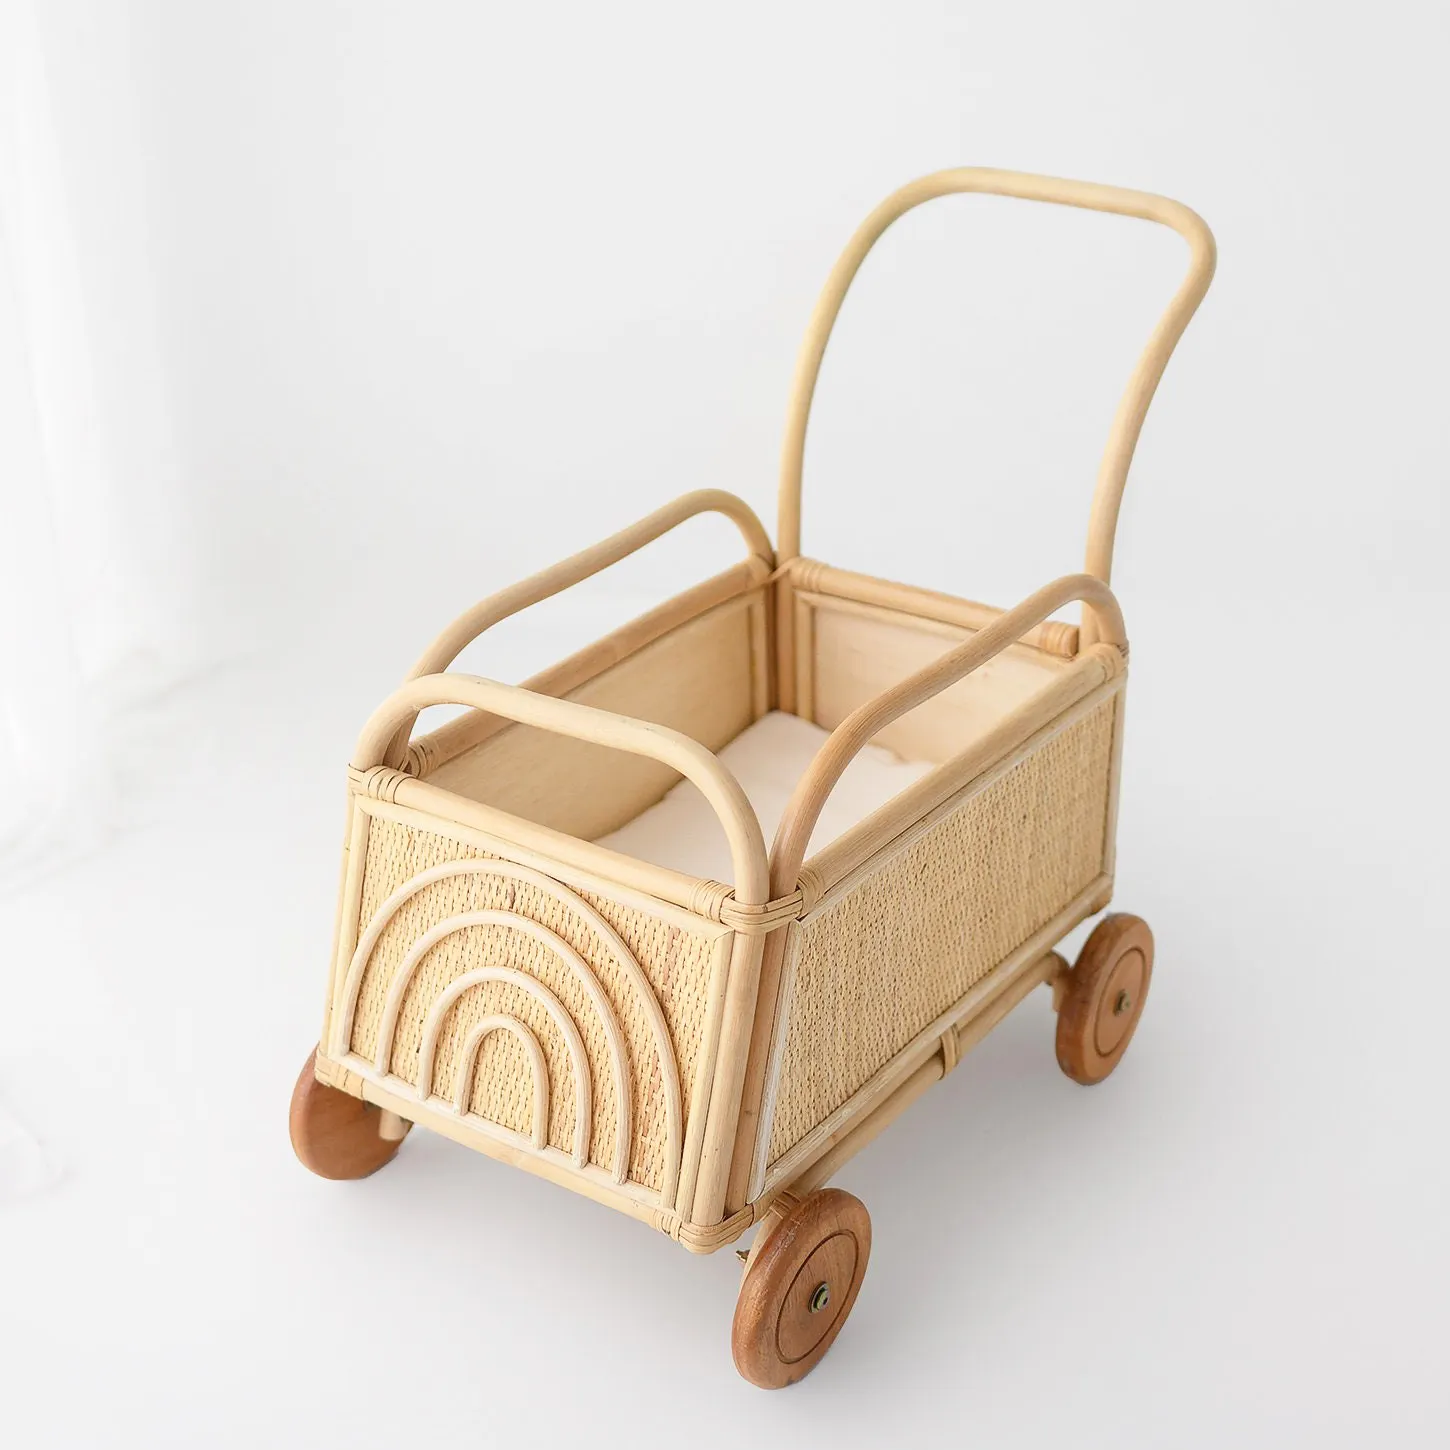 Top selling toys baby stroller rattan trolley for boy and girl handmade wicker toy wagon cart prams with rolling wheels